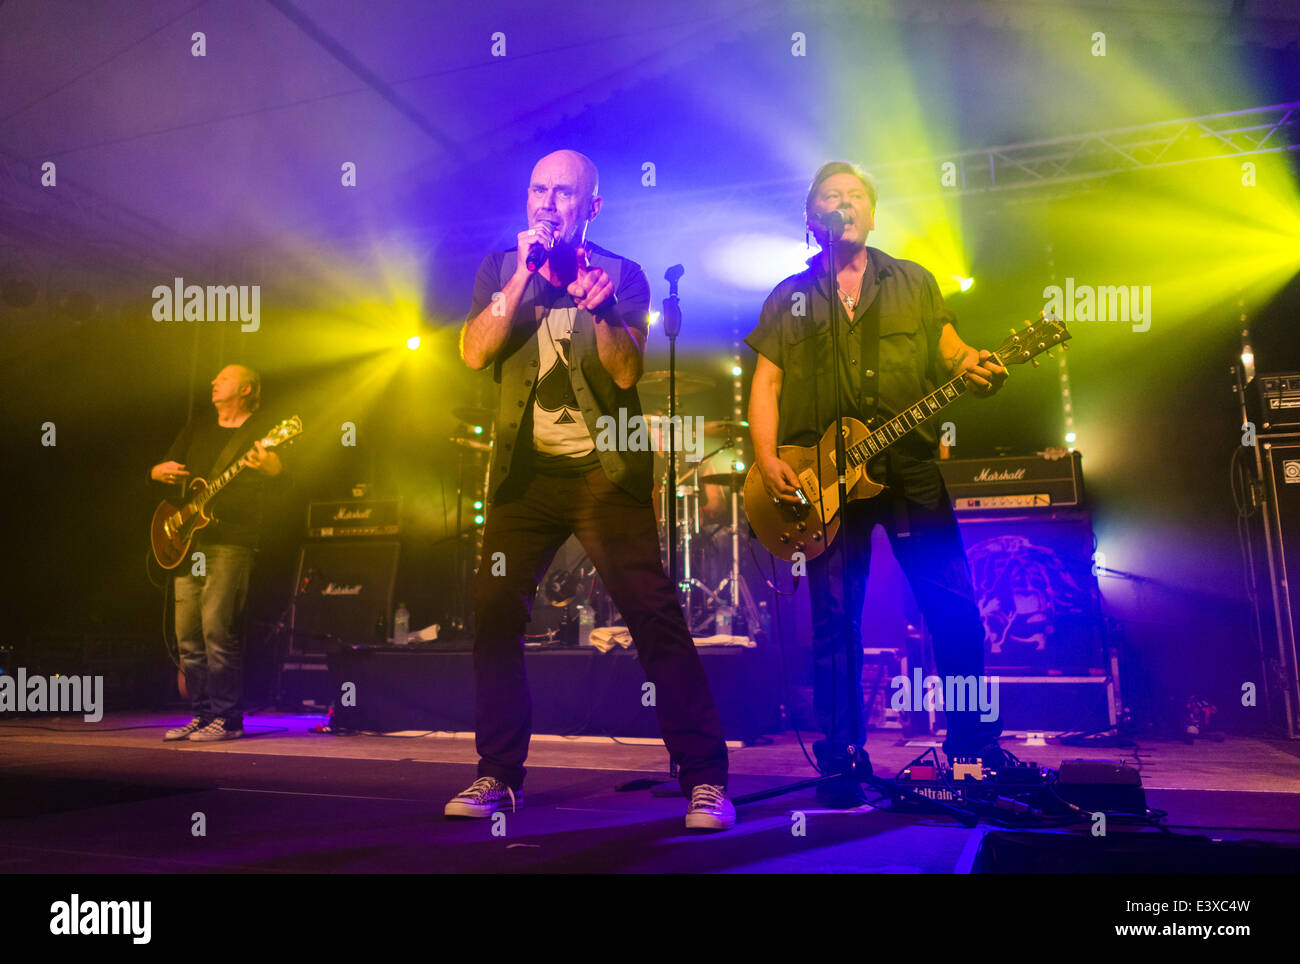 The German rock band 'Extrabreit' performs on a stage. Stock Photo